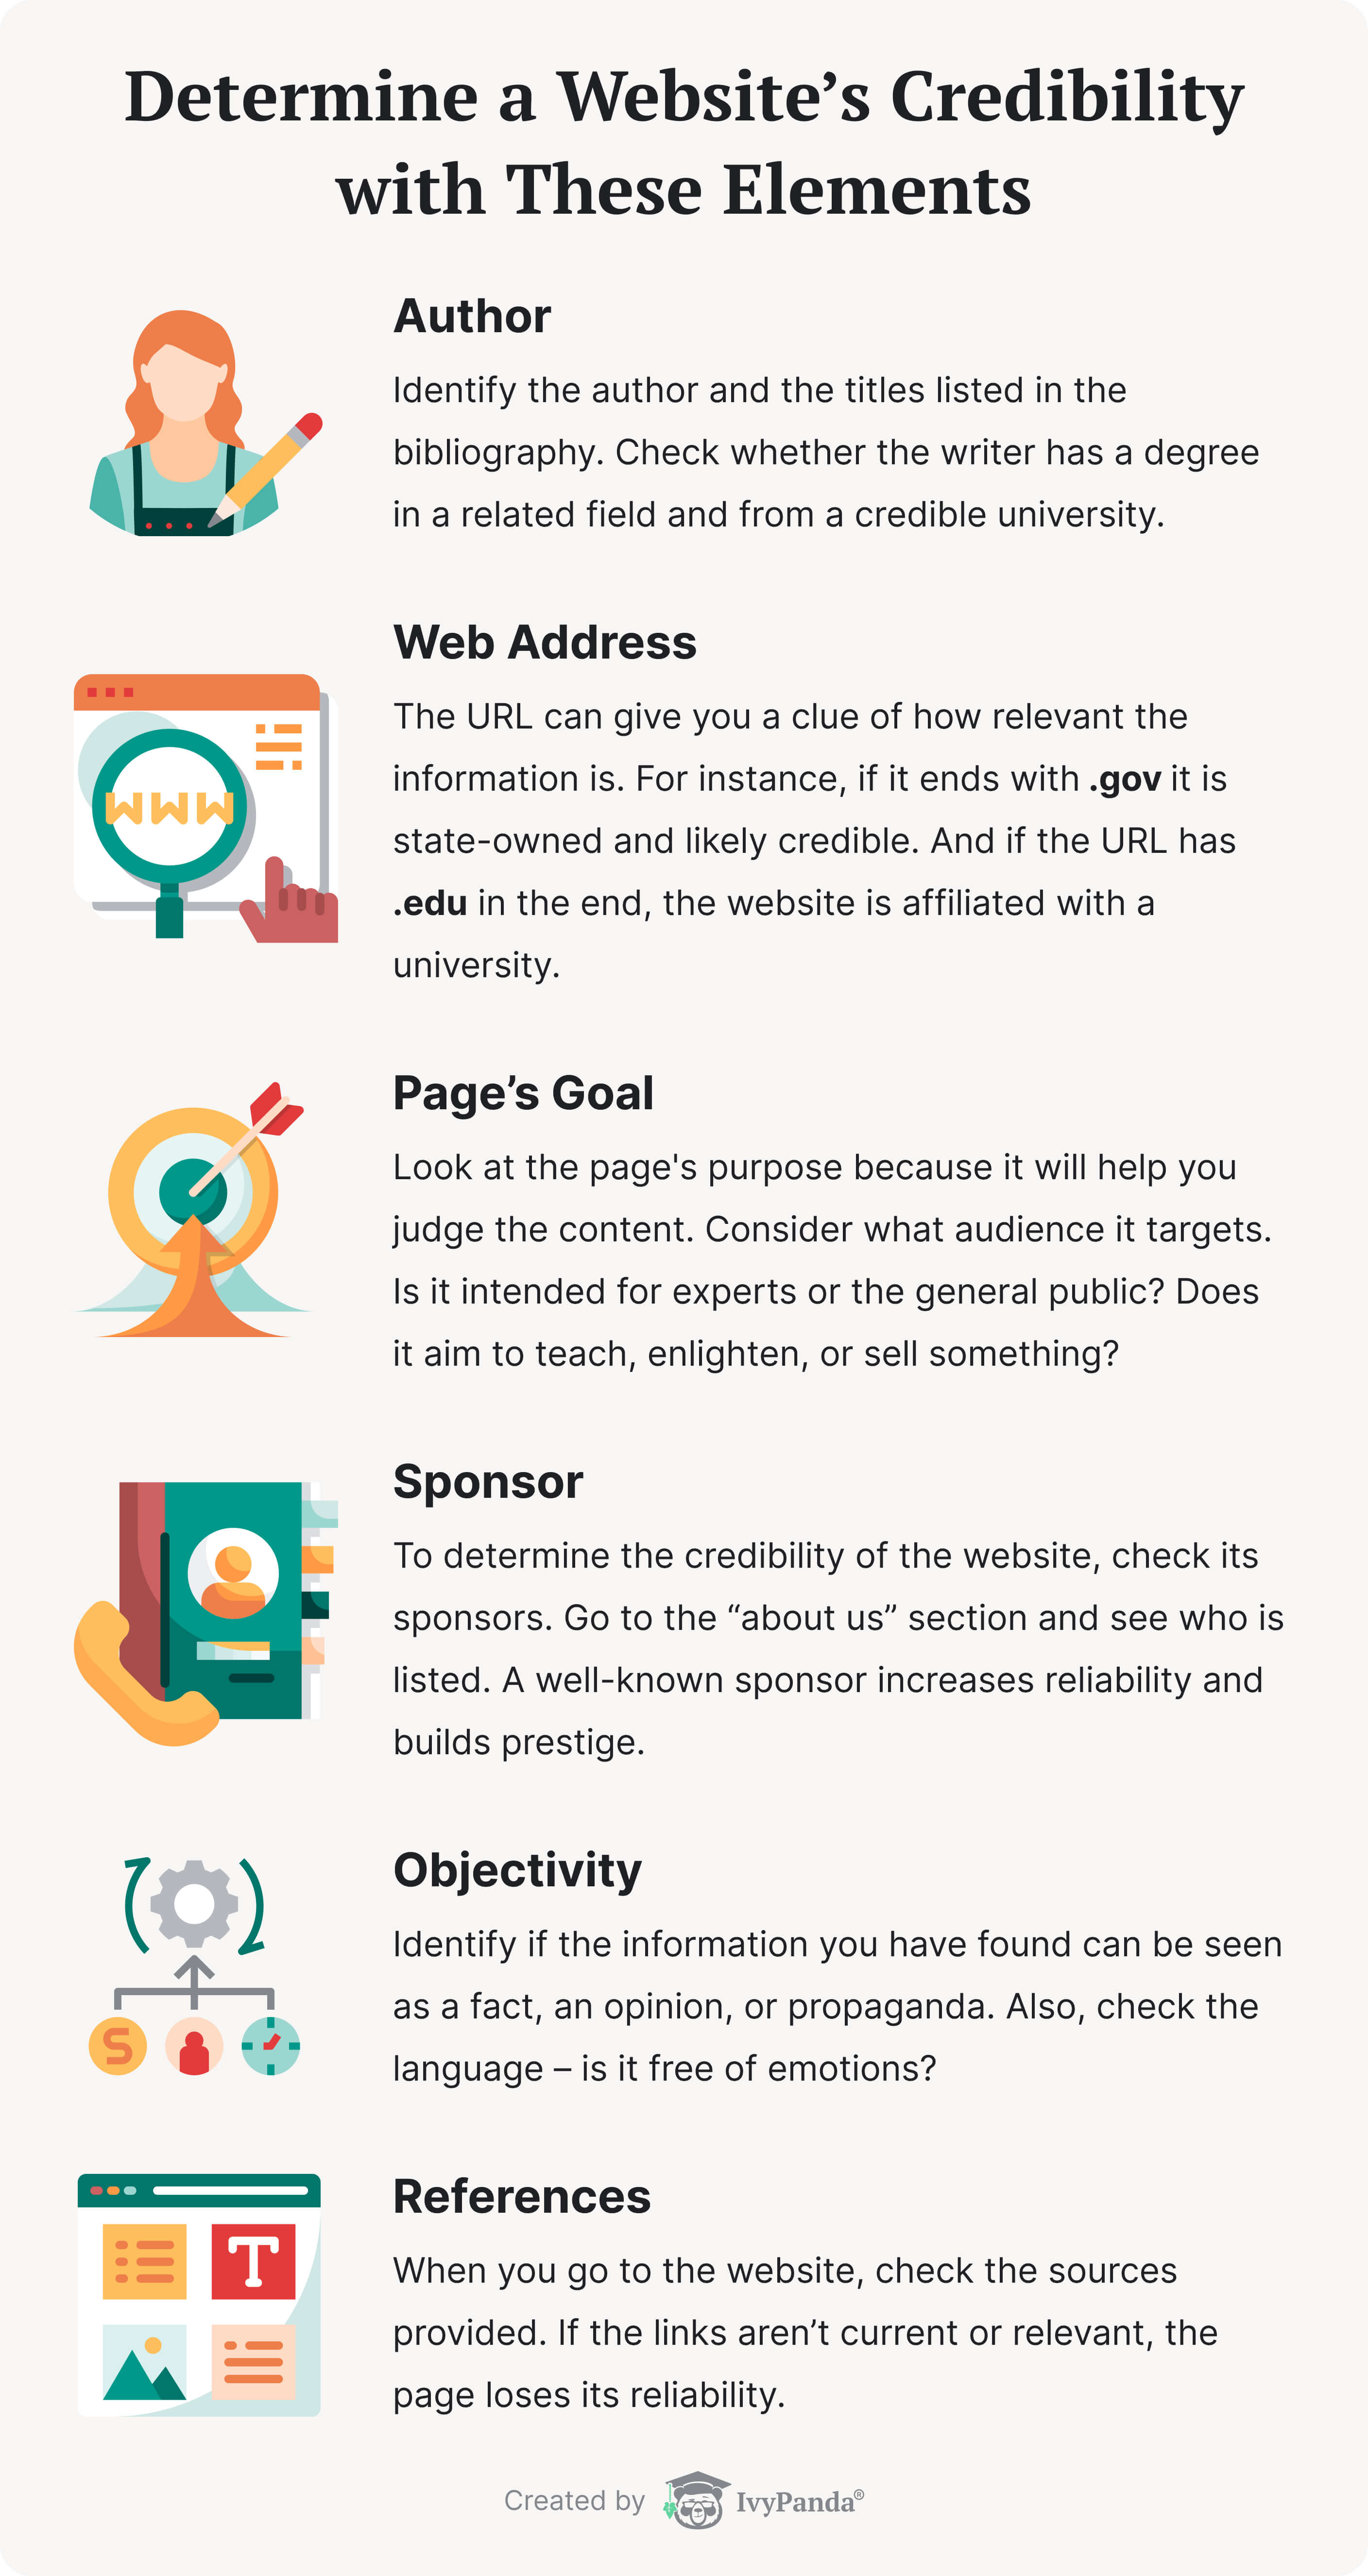 These elements will help you determine whether the website is credible.